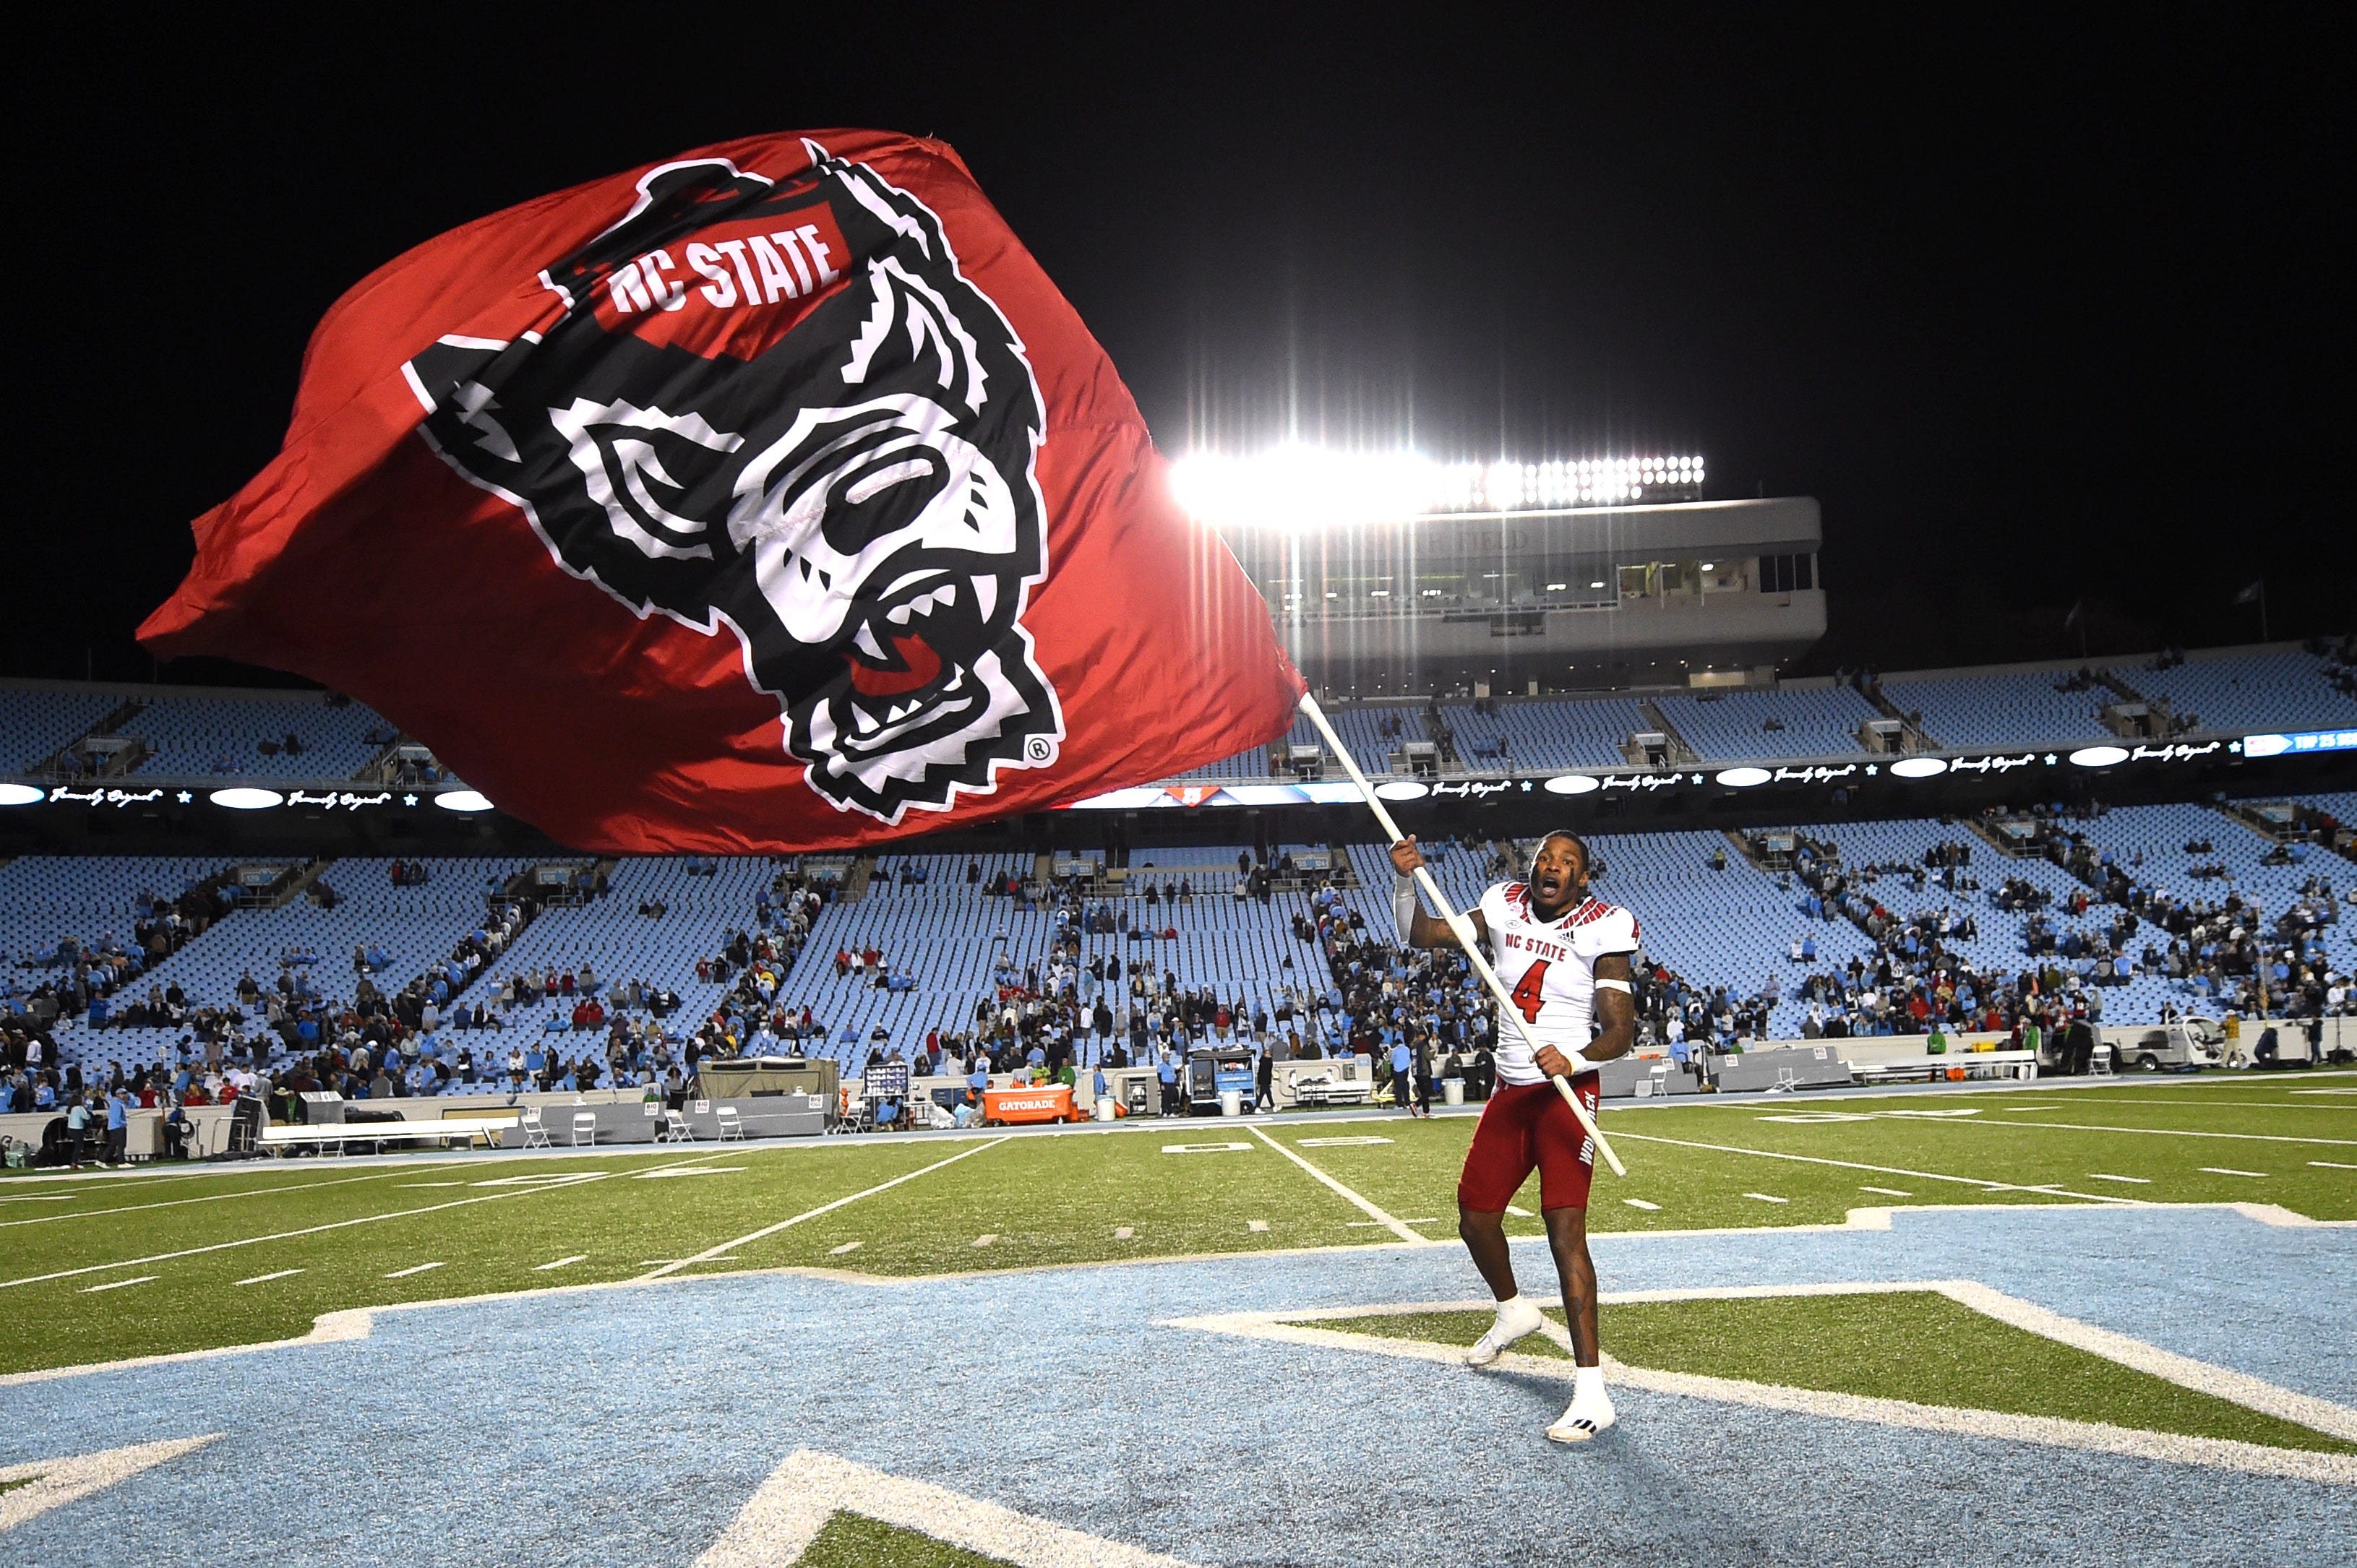 UNC football's wild finish in regulation vs. NC State forces overtime